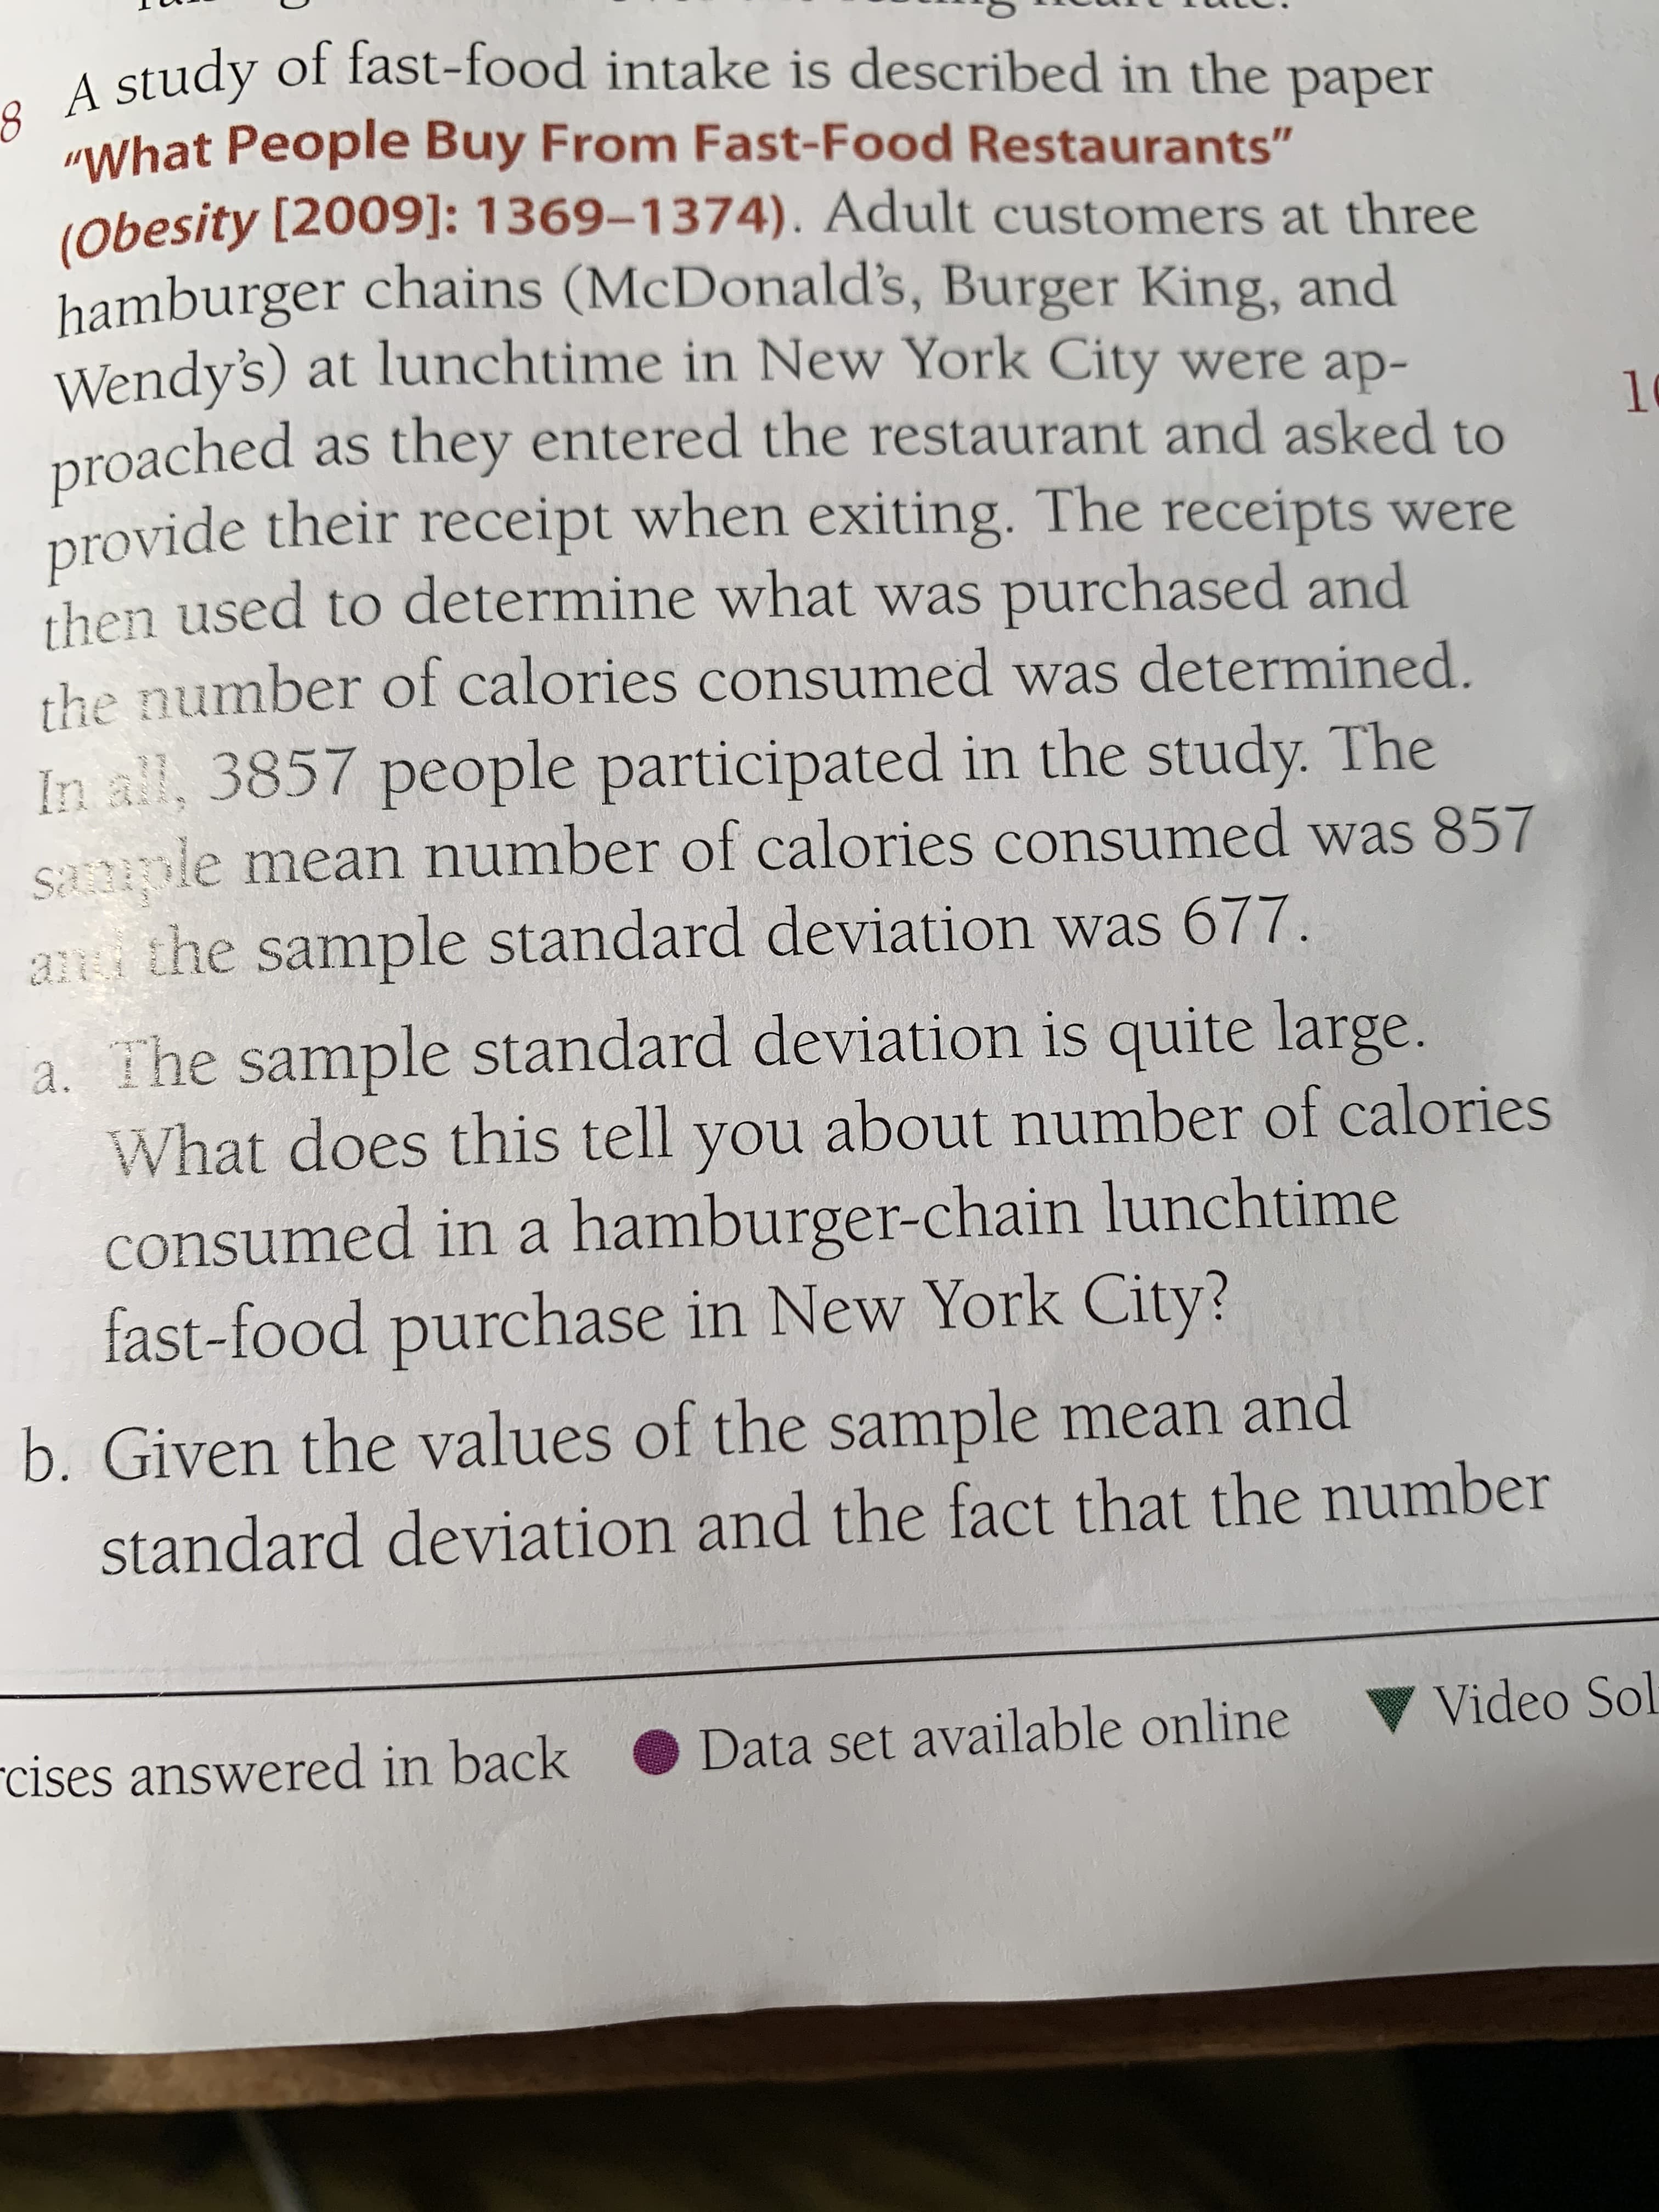 A study of fast-food intake is described in the paper
study
"What People Buy From Fast-Food Restaurants"
(obesity [2009]: 1369-1374). Adult customers at three
hamburger chains (McDonald's, Burger King, and
Wendy's) at lunchtime in New York City were ap-
proached
provide their receipt when exiting. The receipts were
then used to determine what was purchased and
the number of calories consumed was determined.
In all, 3857 people participated in the study. The
saole mean number of calories consumed was 857
ani the sample standard deviation was 677.
as they entered the restaurant and asked to
10
a. The sample standard deviation is quite large.
What does this tell you about number of calories
consumed in a hamburger-chain lunchtime
fast-food purchase in New York City?
b. Given the values of the sample mean and
standard deviation and the fact that the number
rcises answered in back
Data set available online
Video Sol
